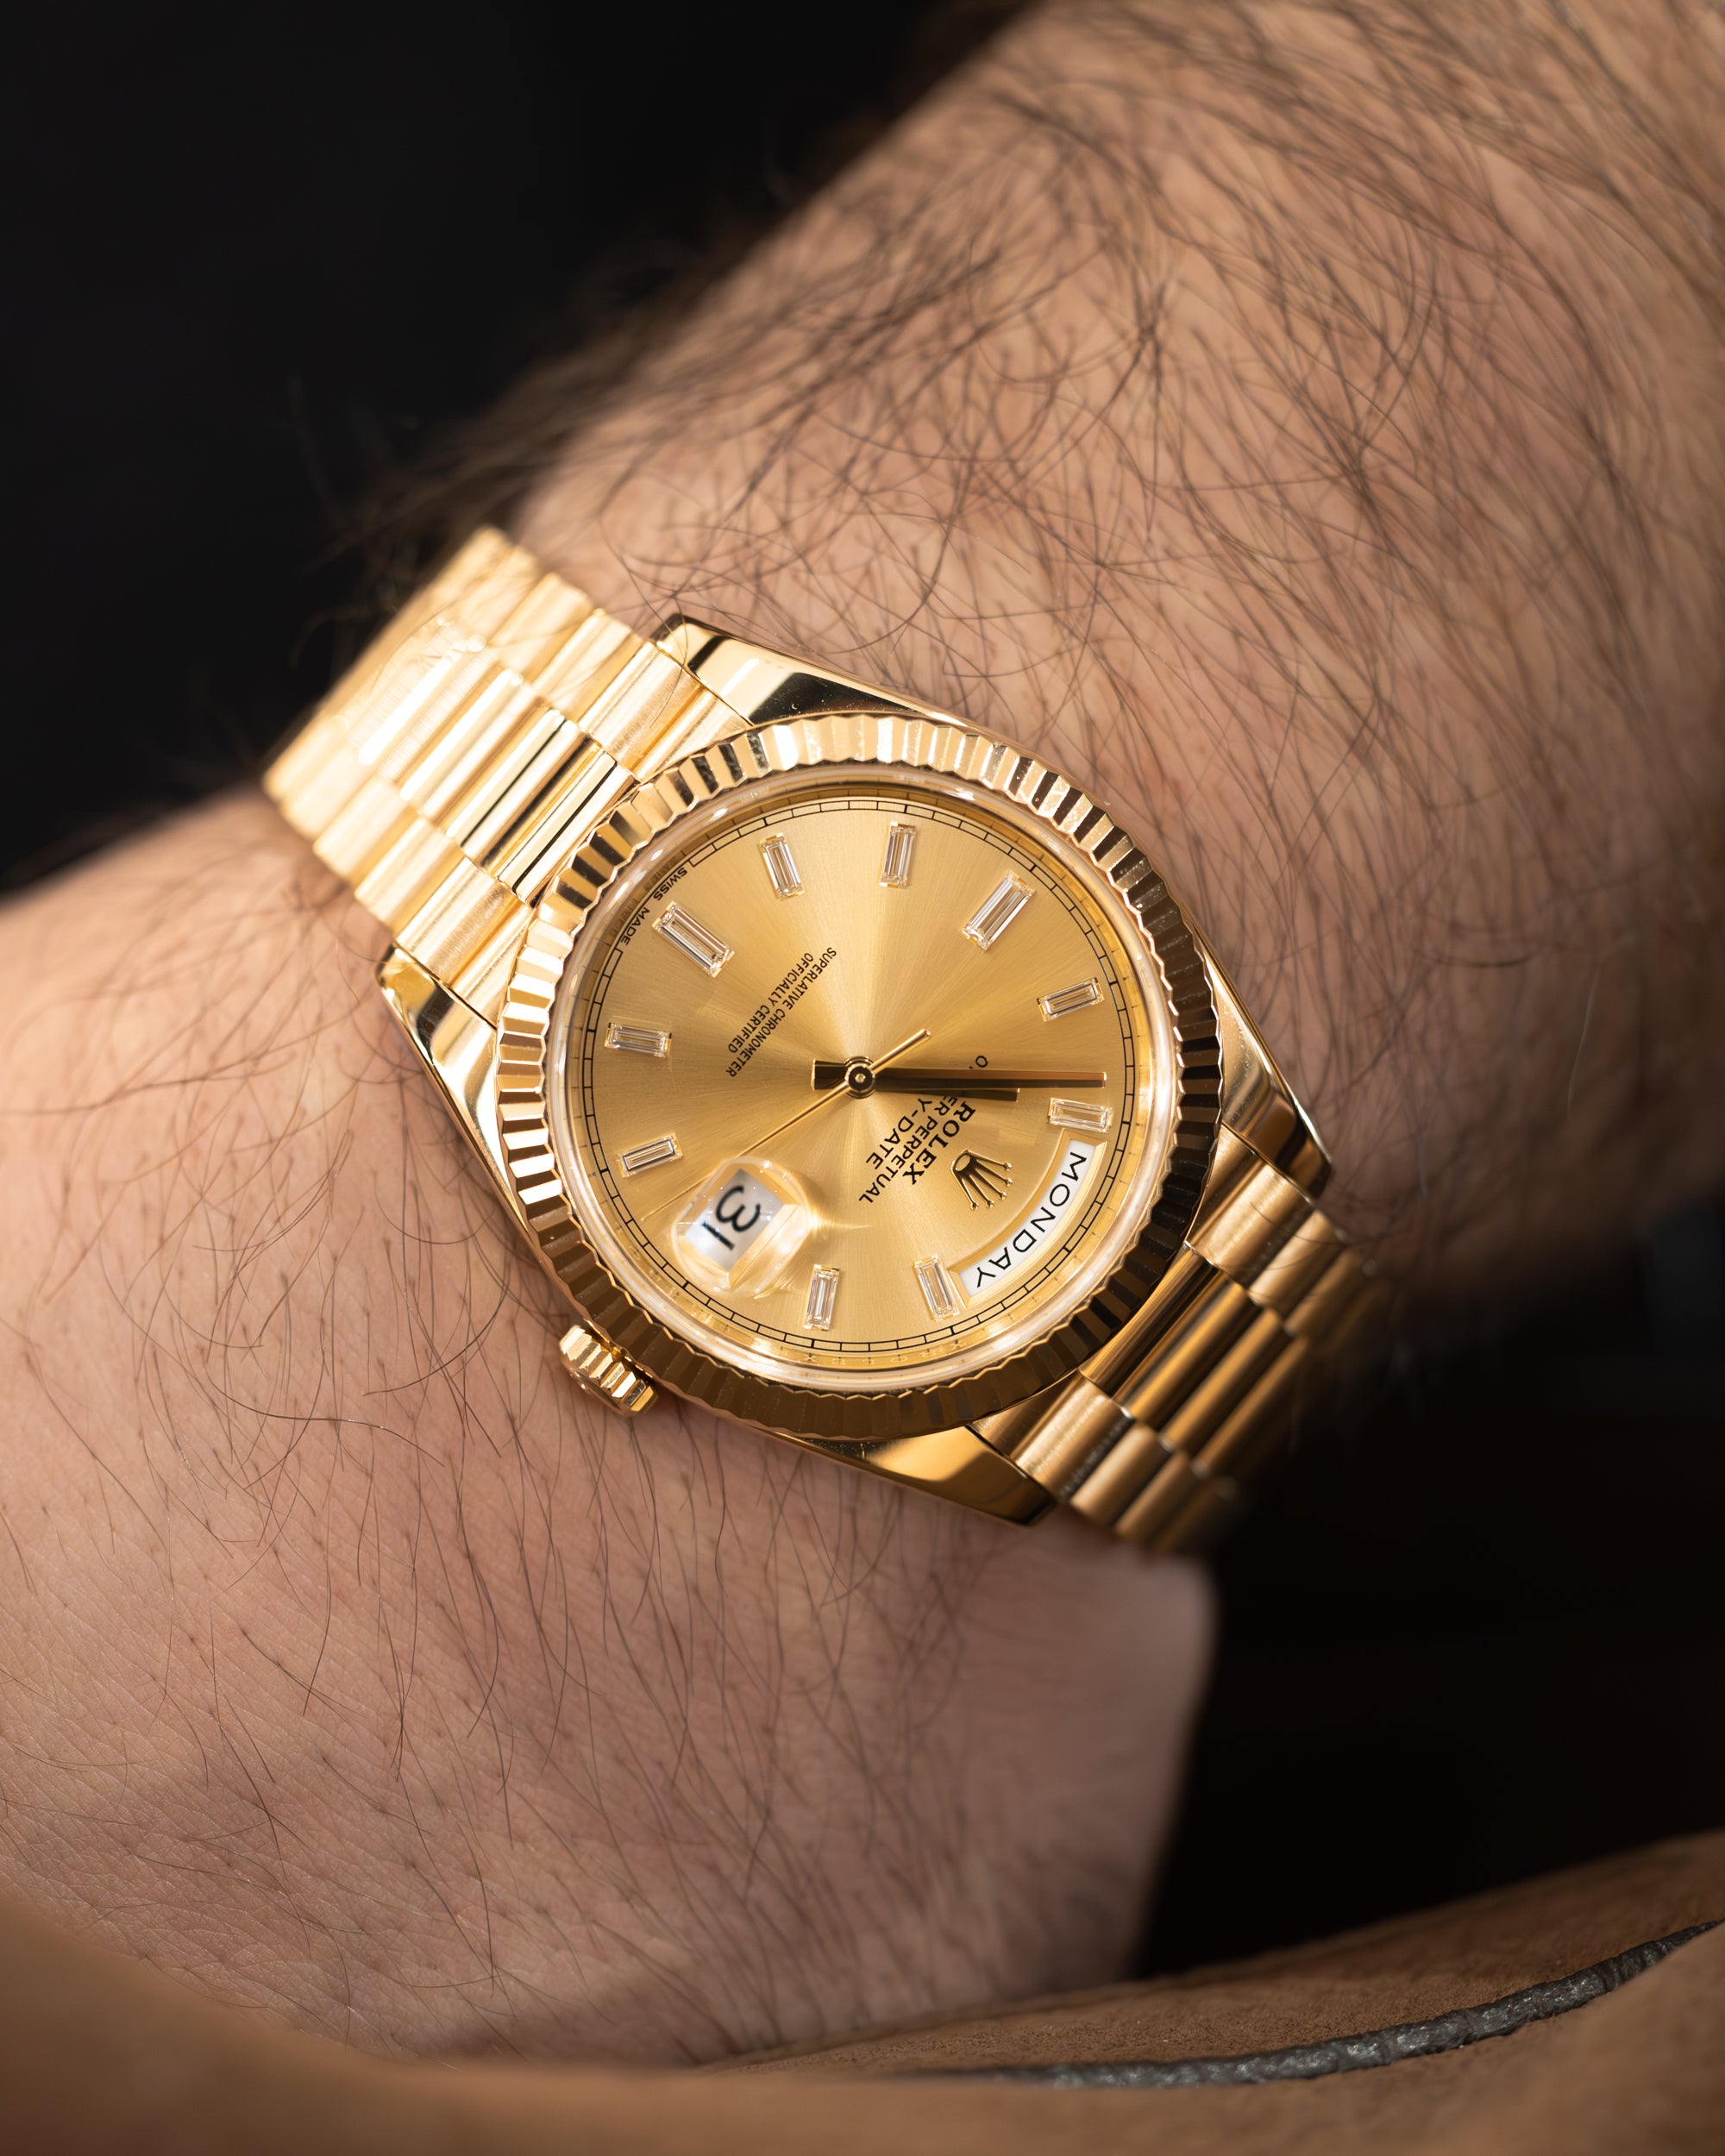 Day-Date 40 Ref. 228238 "Baguette"